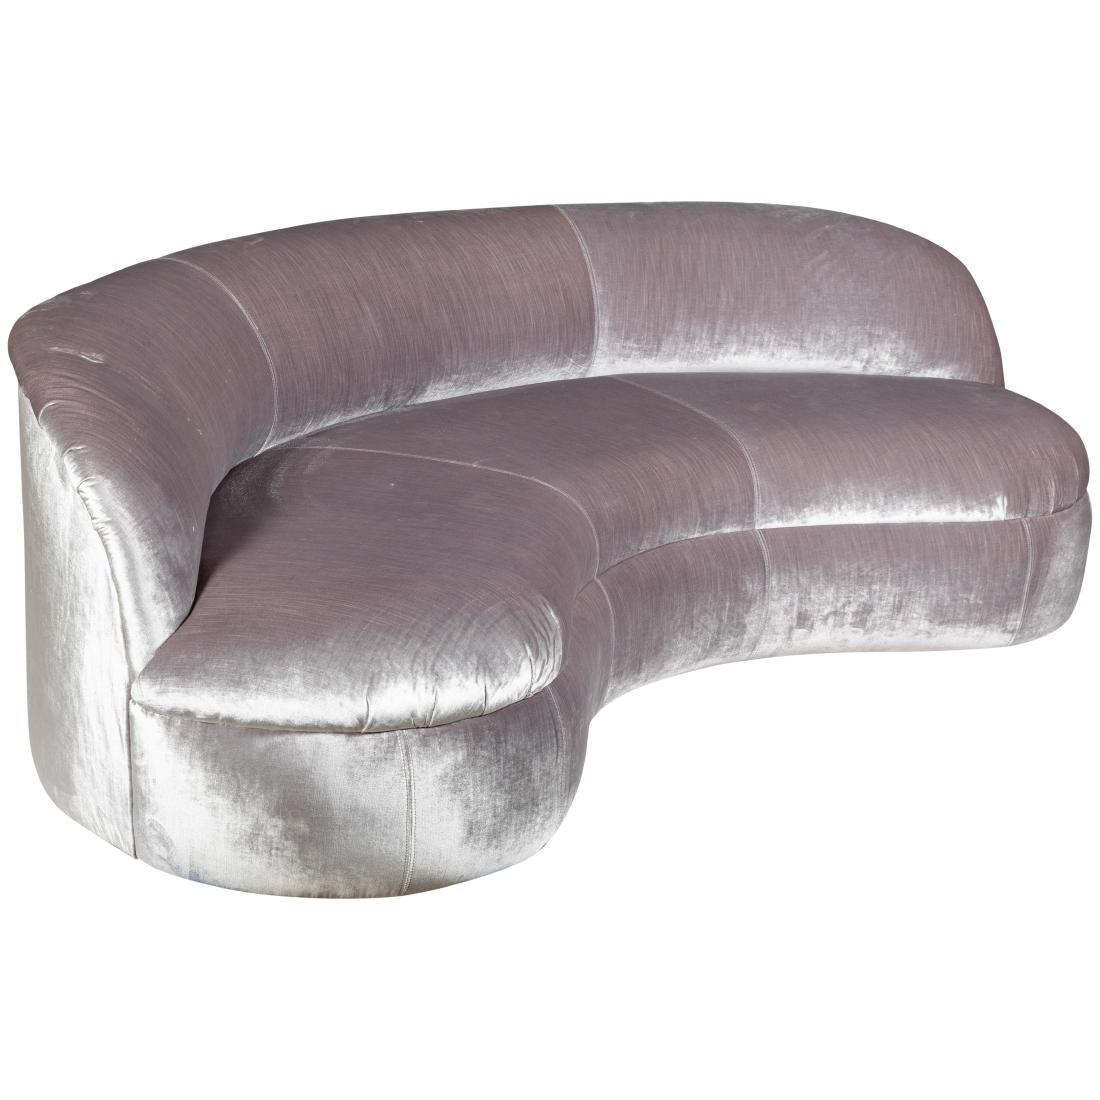 Pair of directional biomorphic curved velvet sofas. Kagan style.